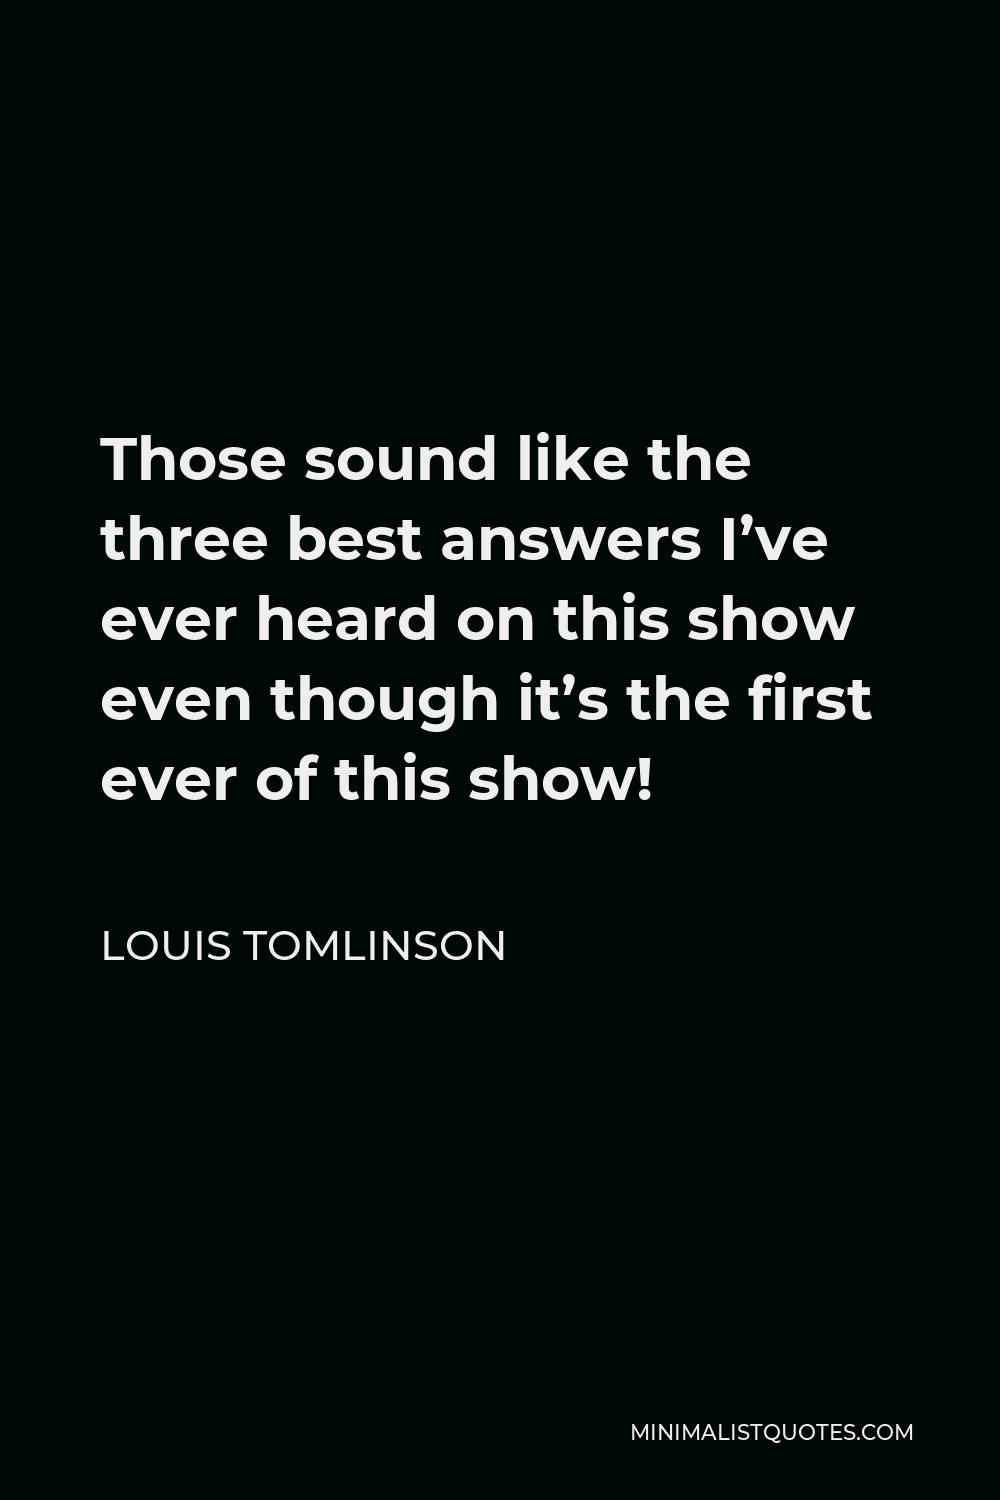 Louis Tomlinson Quote - Those sound like the three best answers I’ve ever heard on this show even though it’s the first ever of this show!